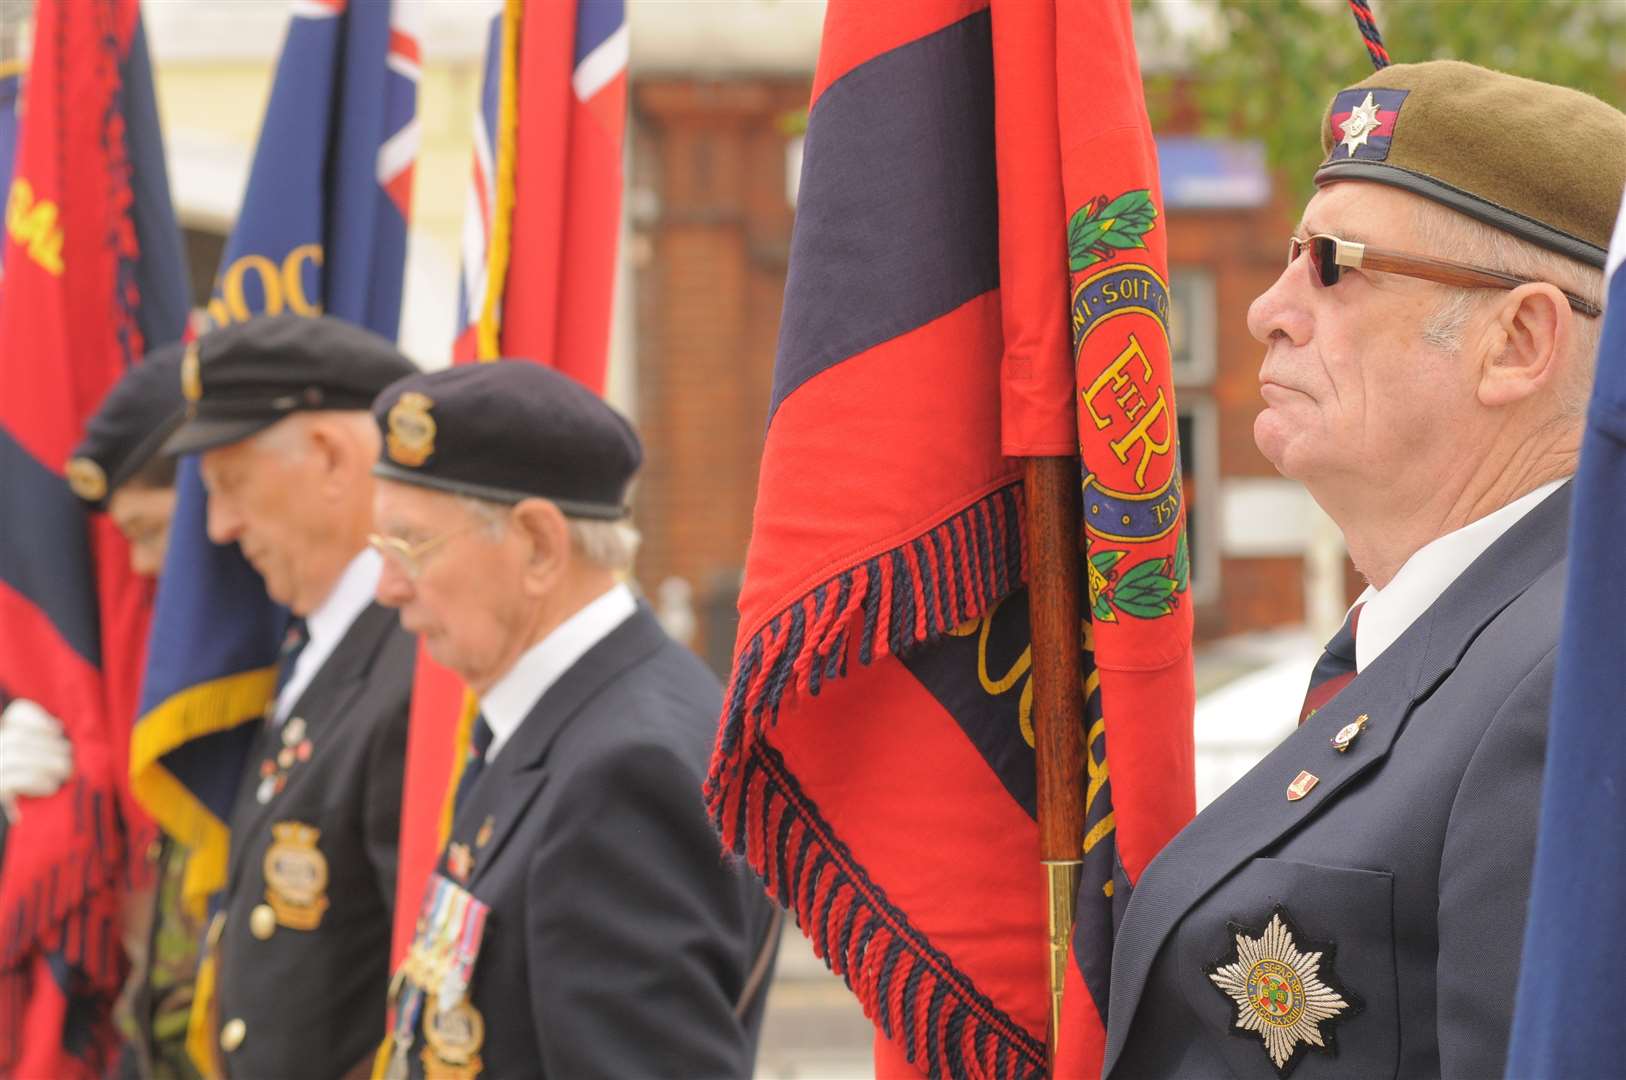 Standard bears stand in formation at a Armed Forces Day ceremony in Community Square, Gravesend